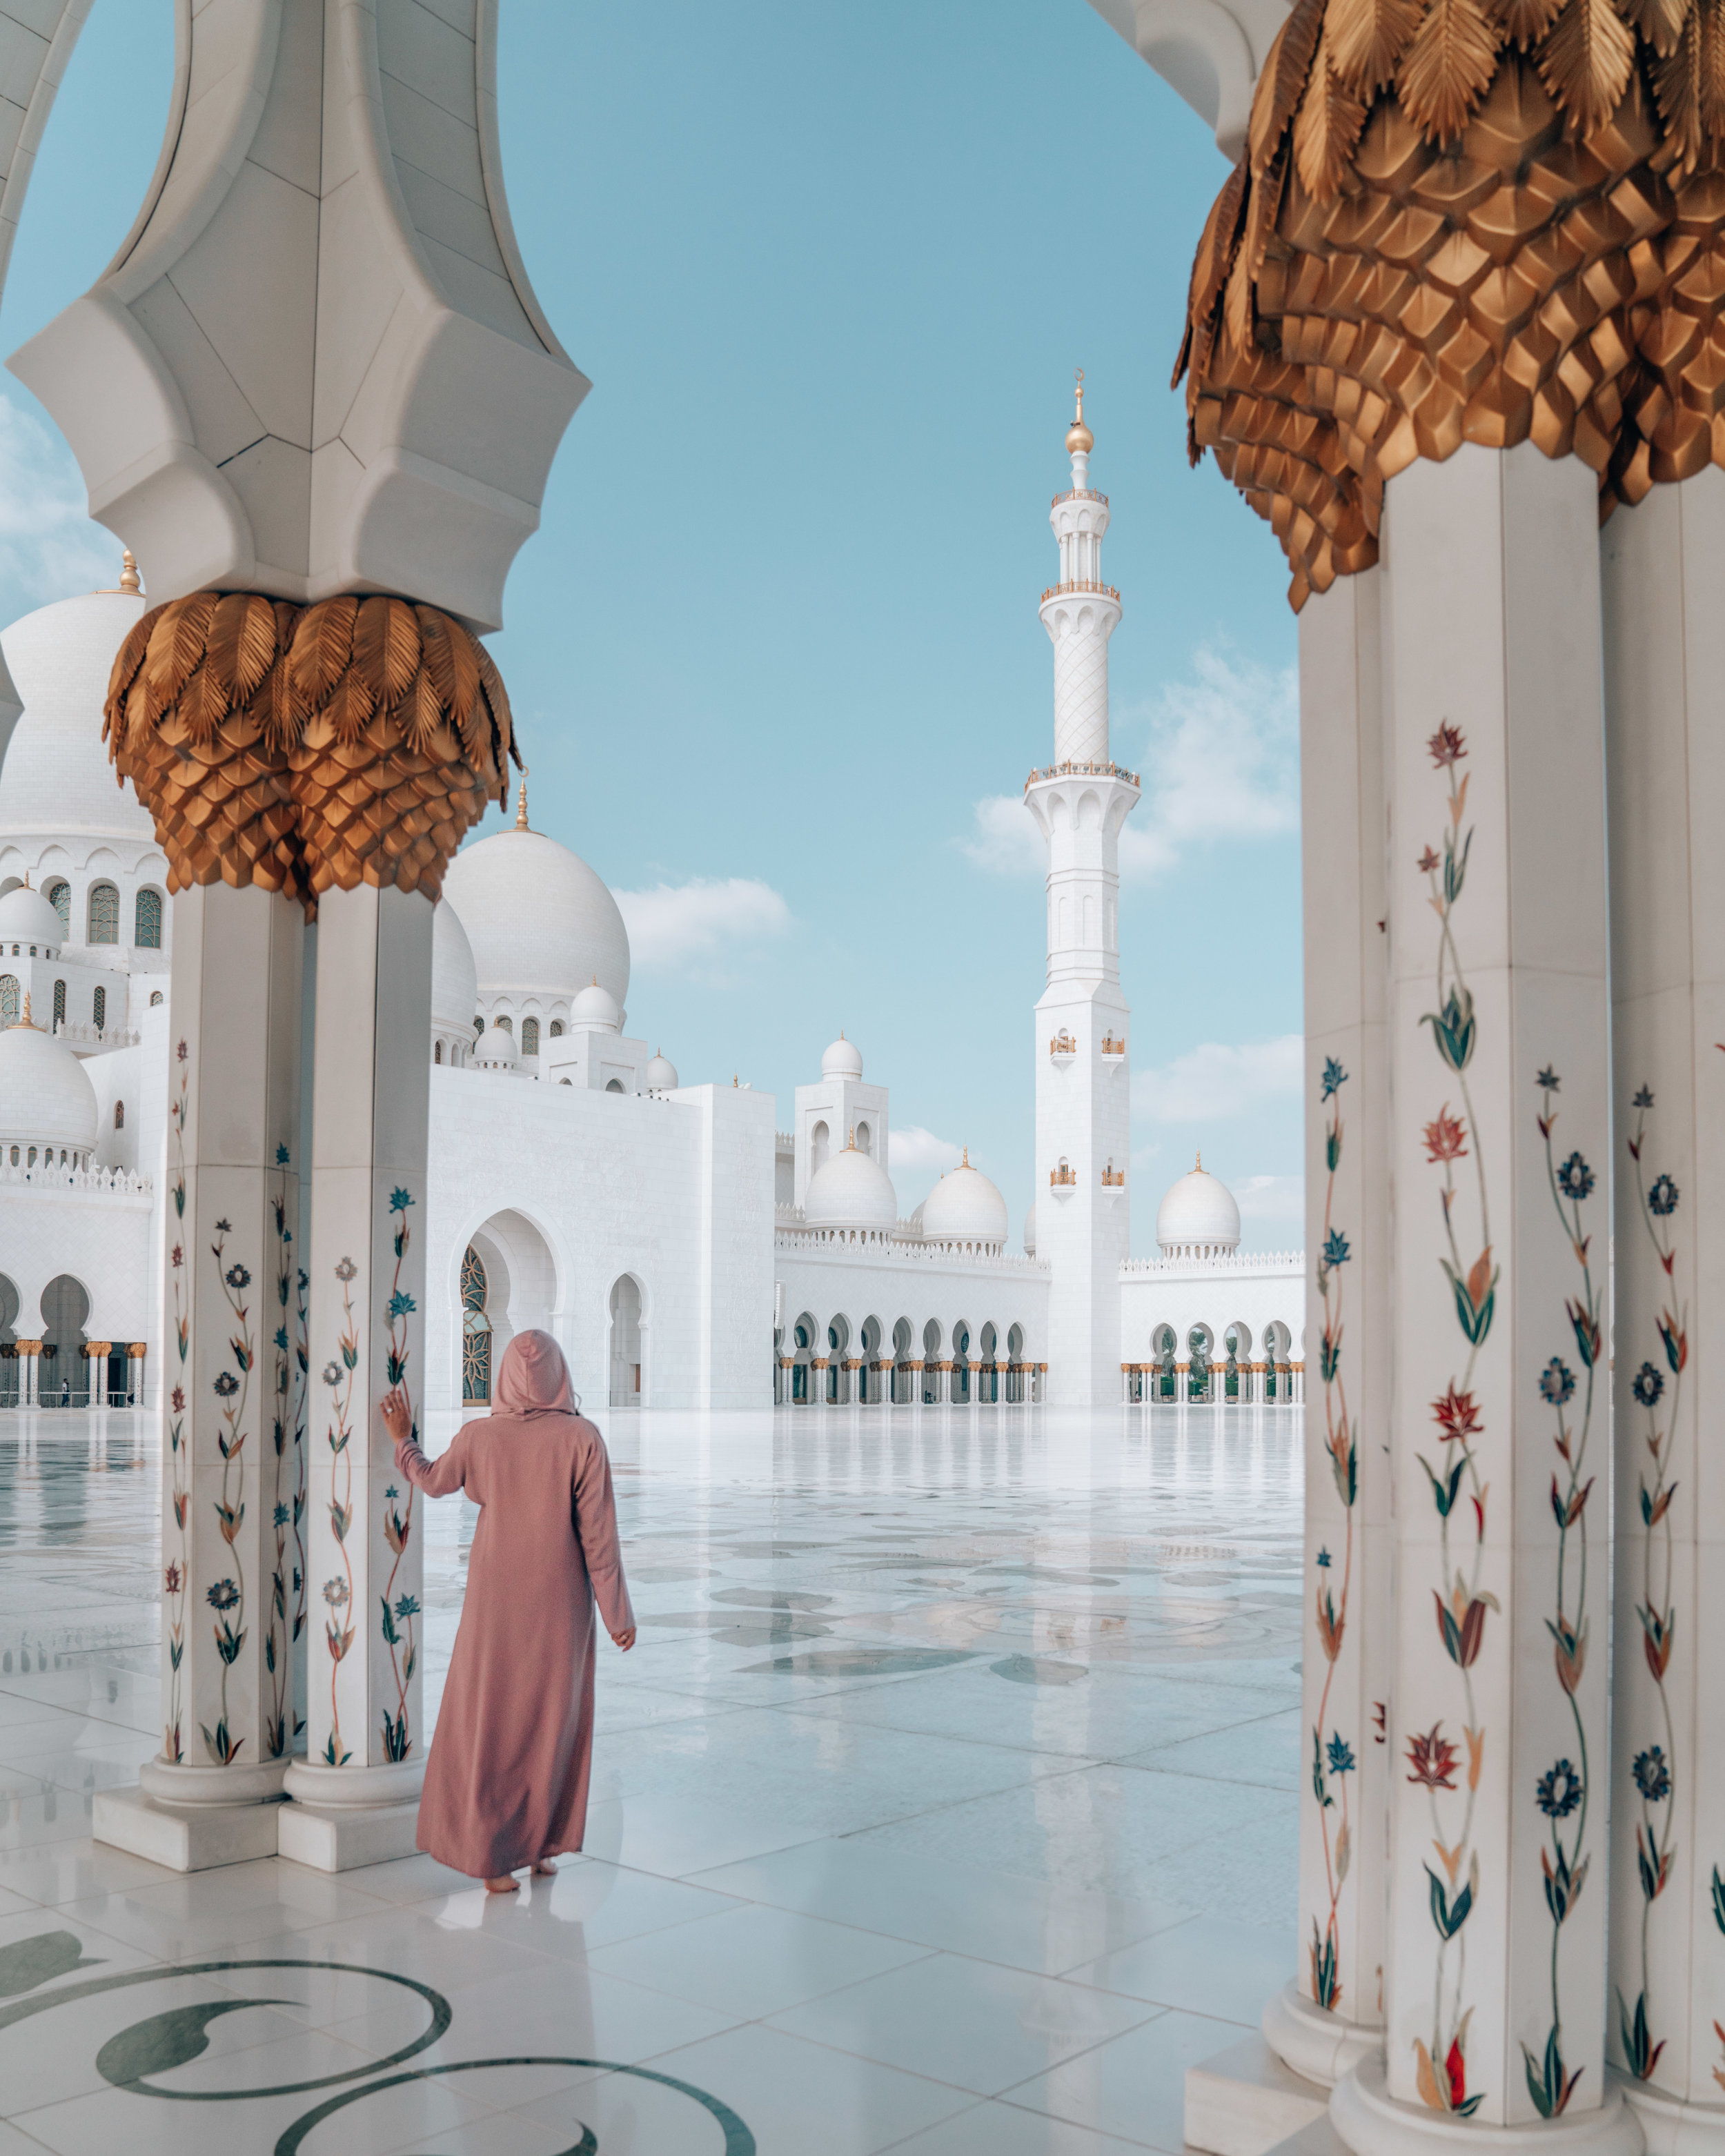 Sheikh Zayed Mosque • Facts and Feelings from a Night-time Visit